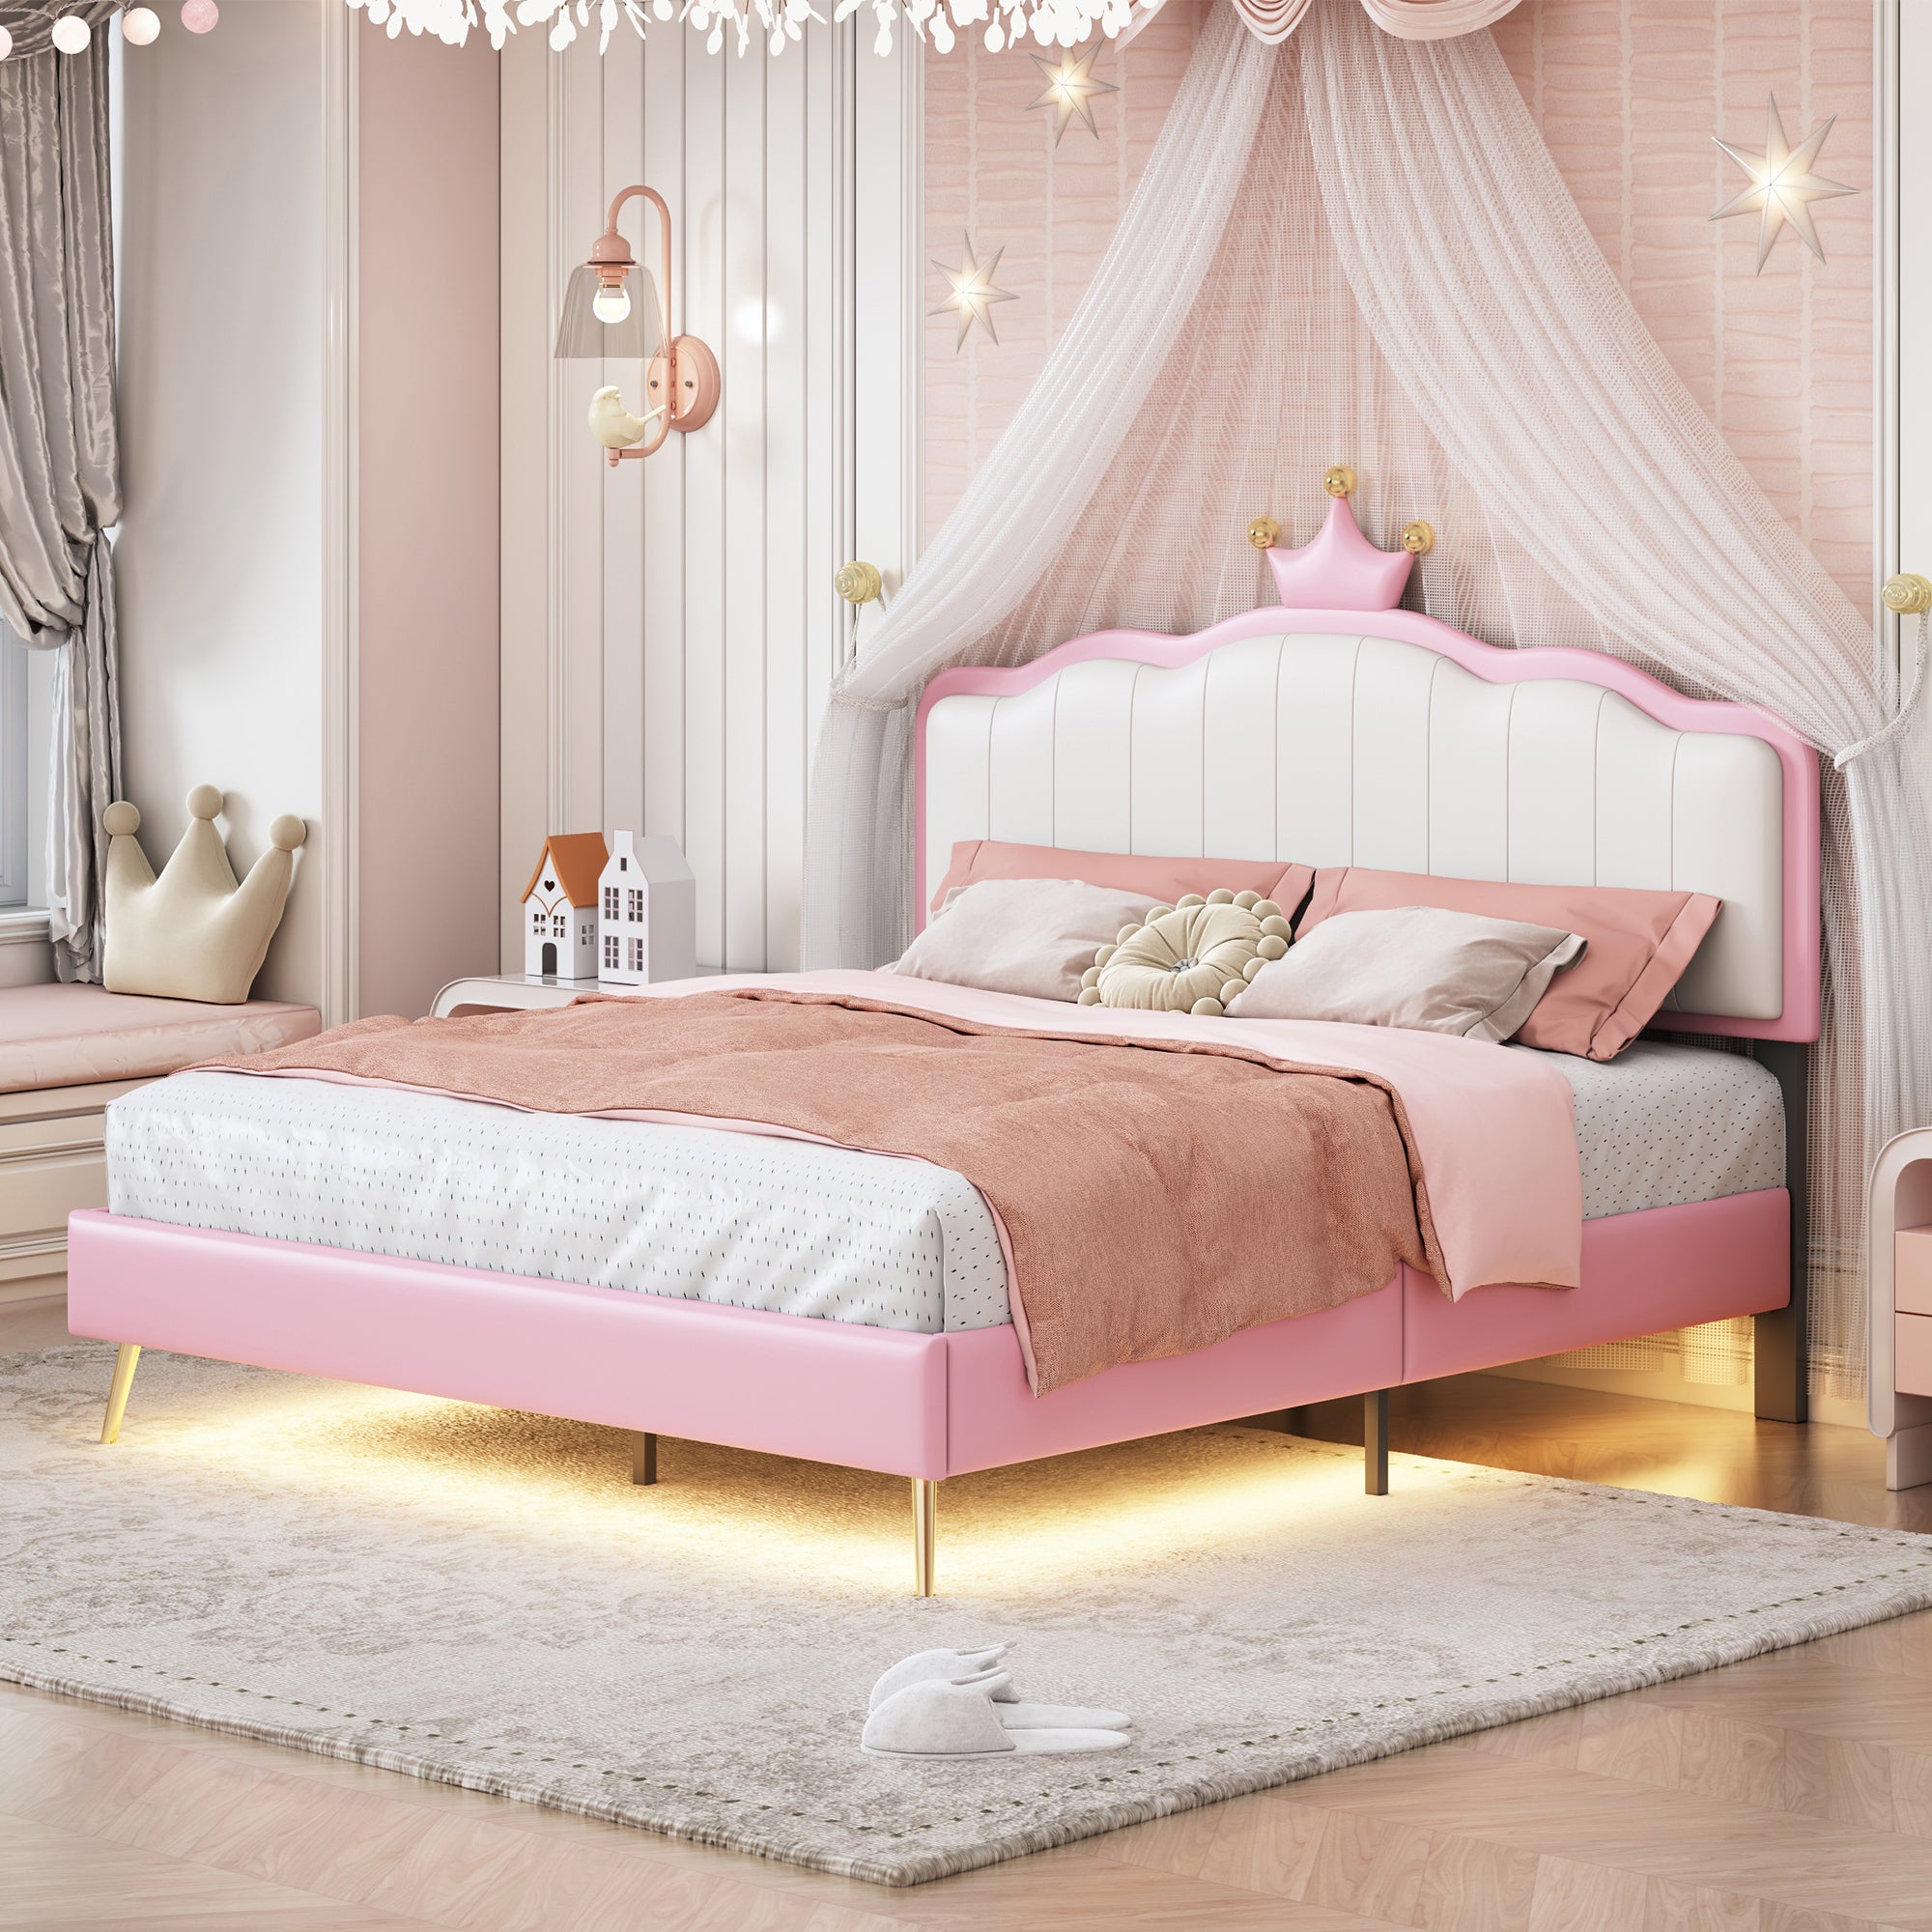 🆓🚛 Full Size Upholstered Princess Bed With Crown Headboard, Full Size Platform Bed With Headboard and Footboard With Light Strips, Golden Metal Legs, White+Pink